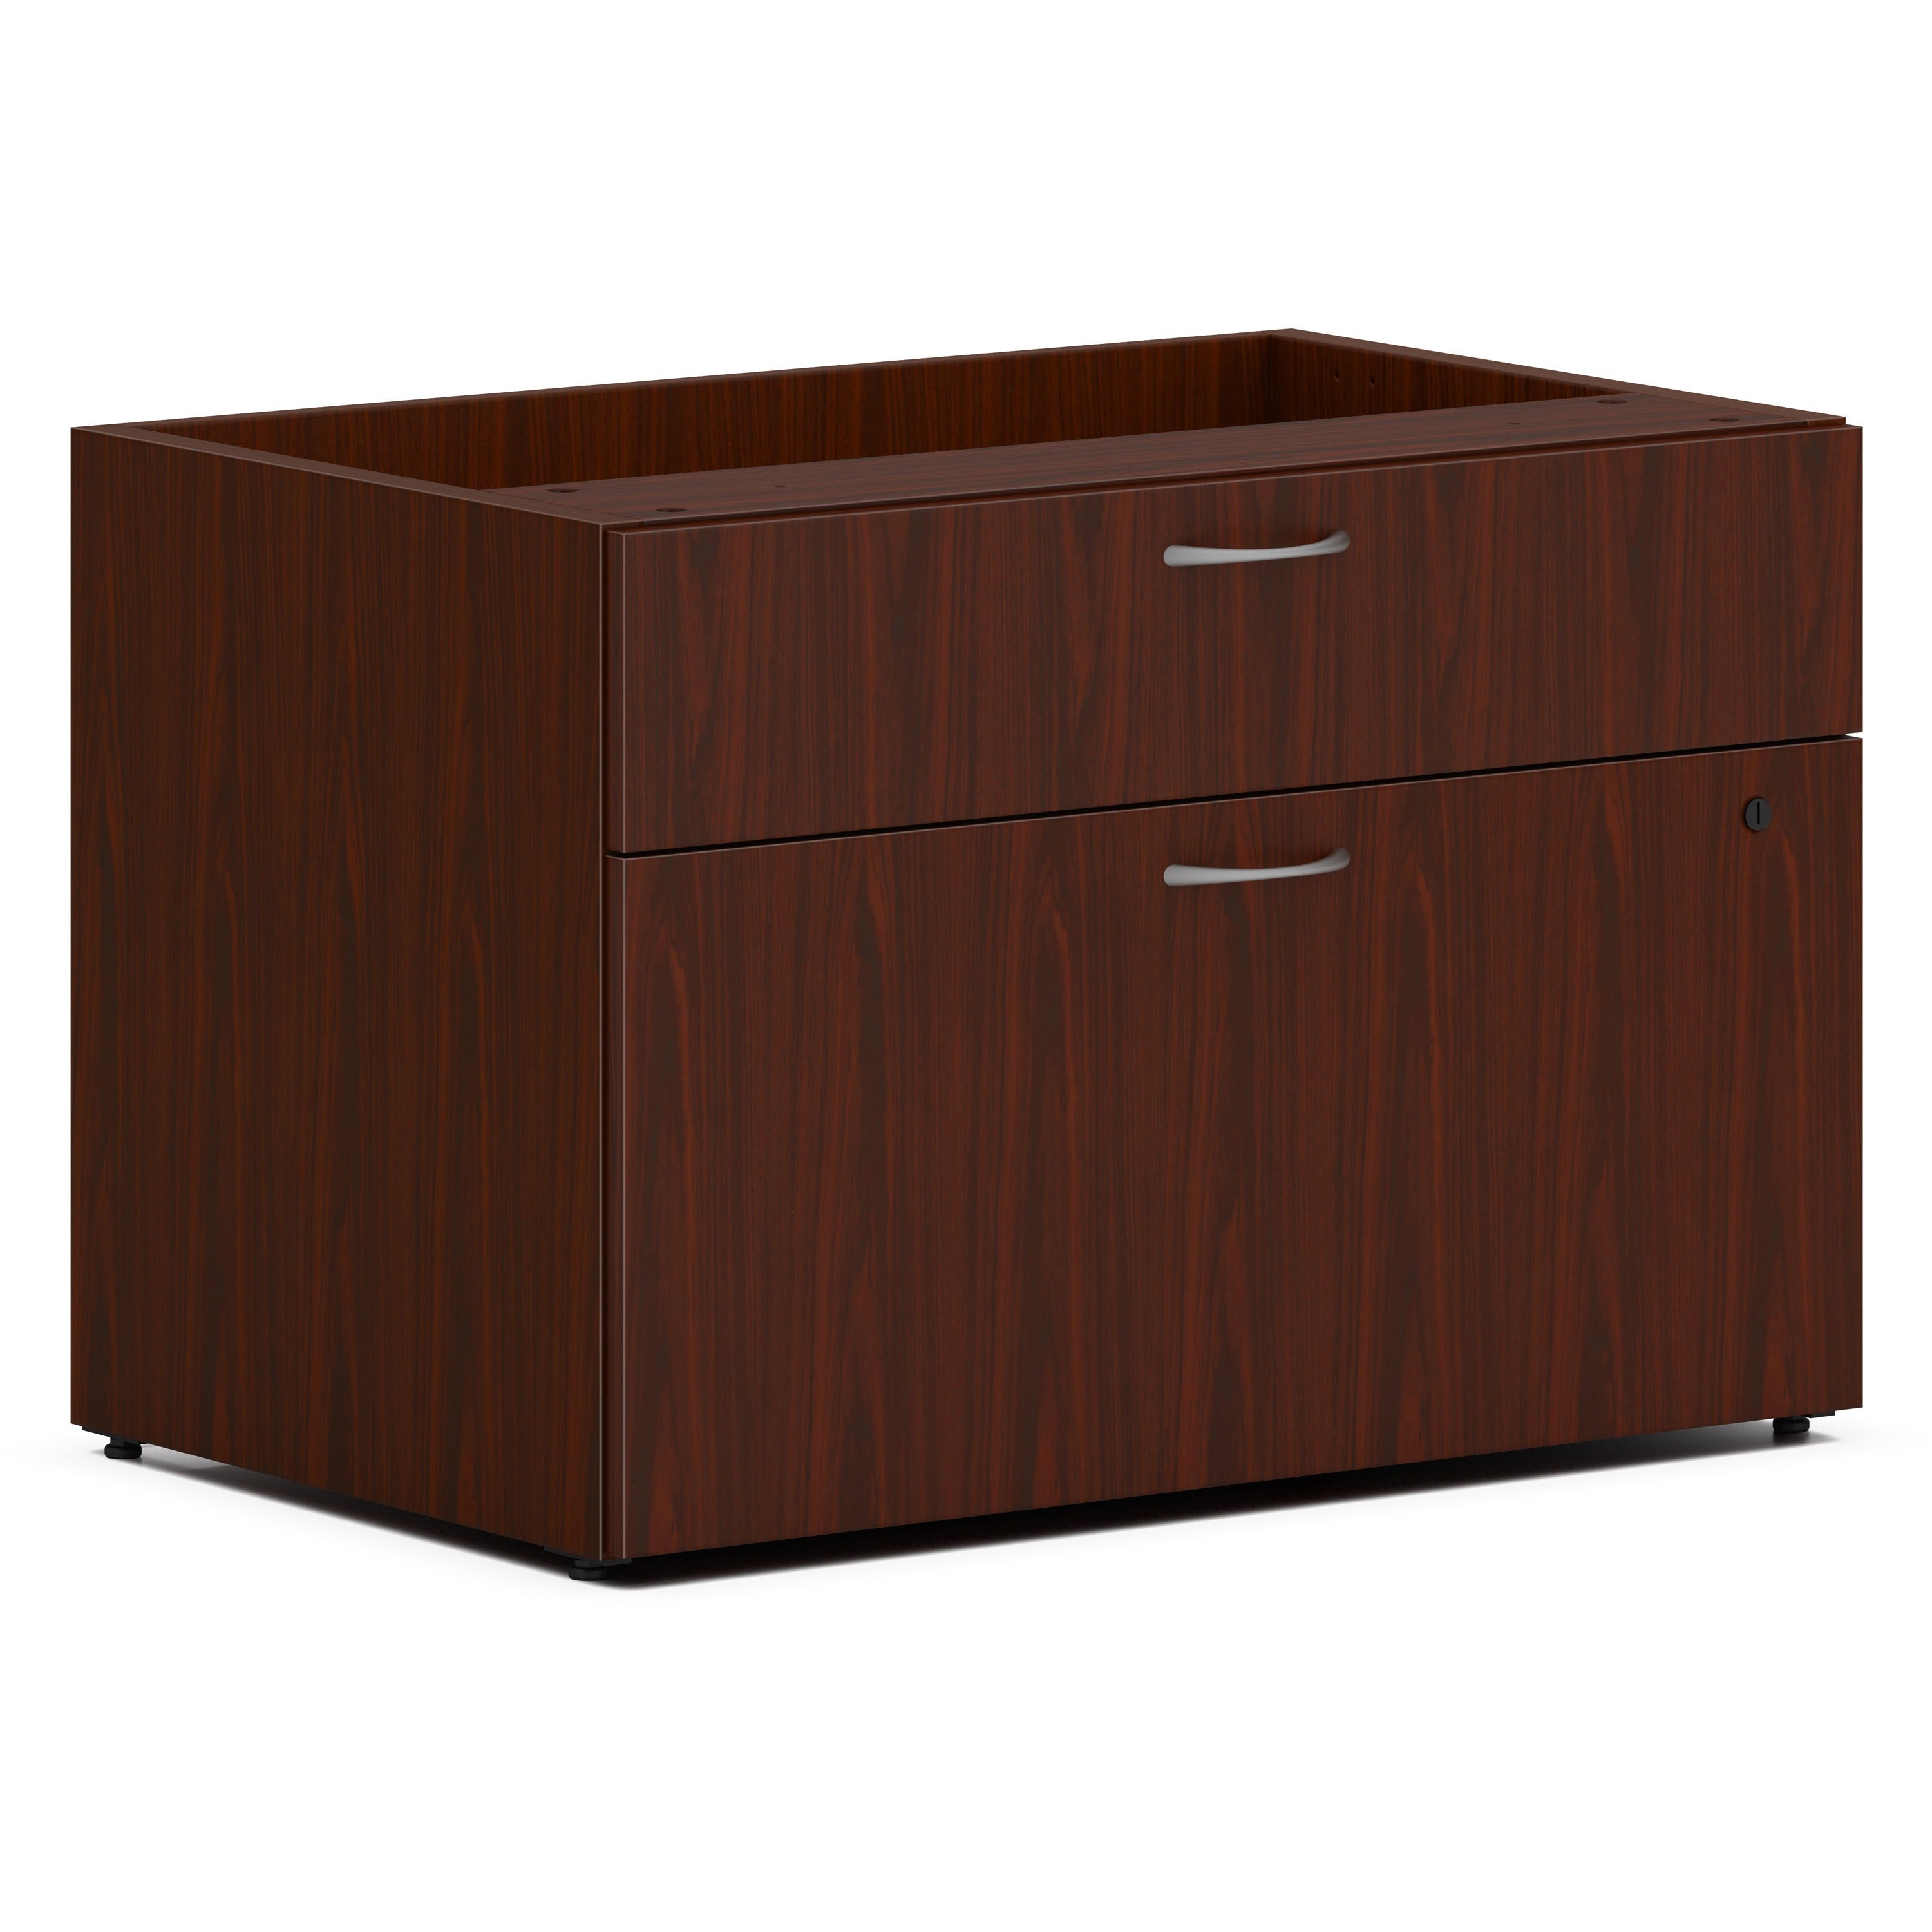 hon-mod-low-personal-credenza-|-2-drawers-|-30w-|-traditional-mahogany-finish-30-x-2021-2-x-storage-file-drawers-finish-traditional-mahogany_honlcl3020bflt1 - 1